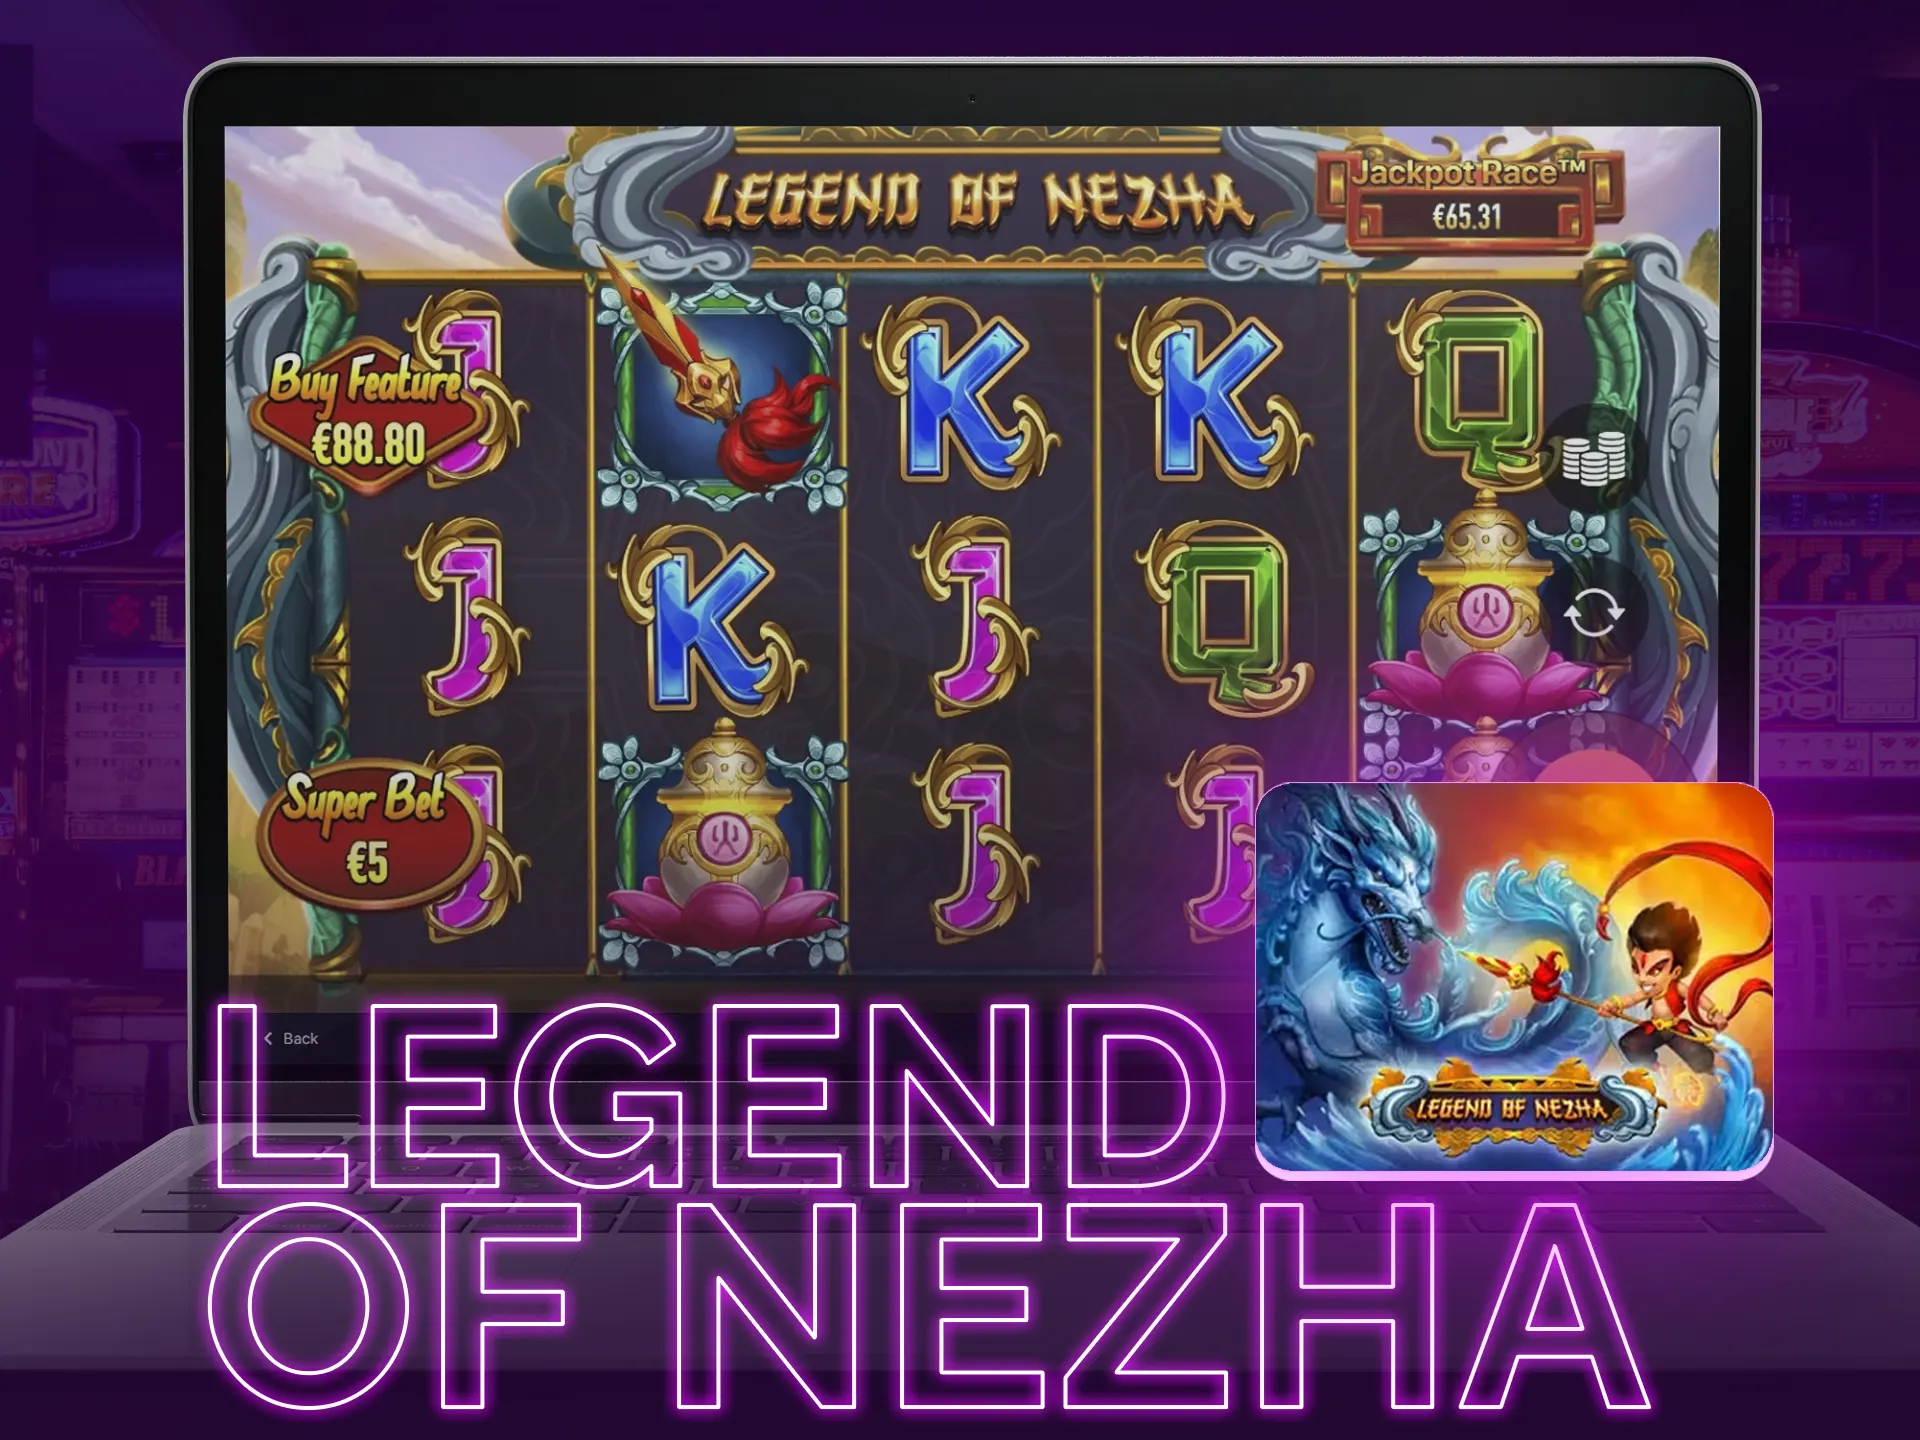 Play Legend of Nezha, double winnings with abilities.